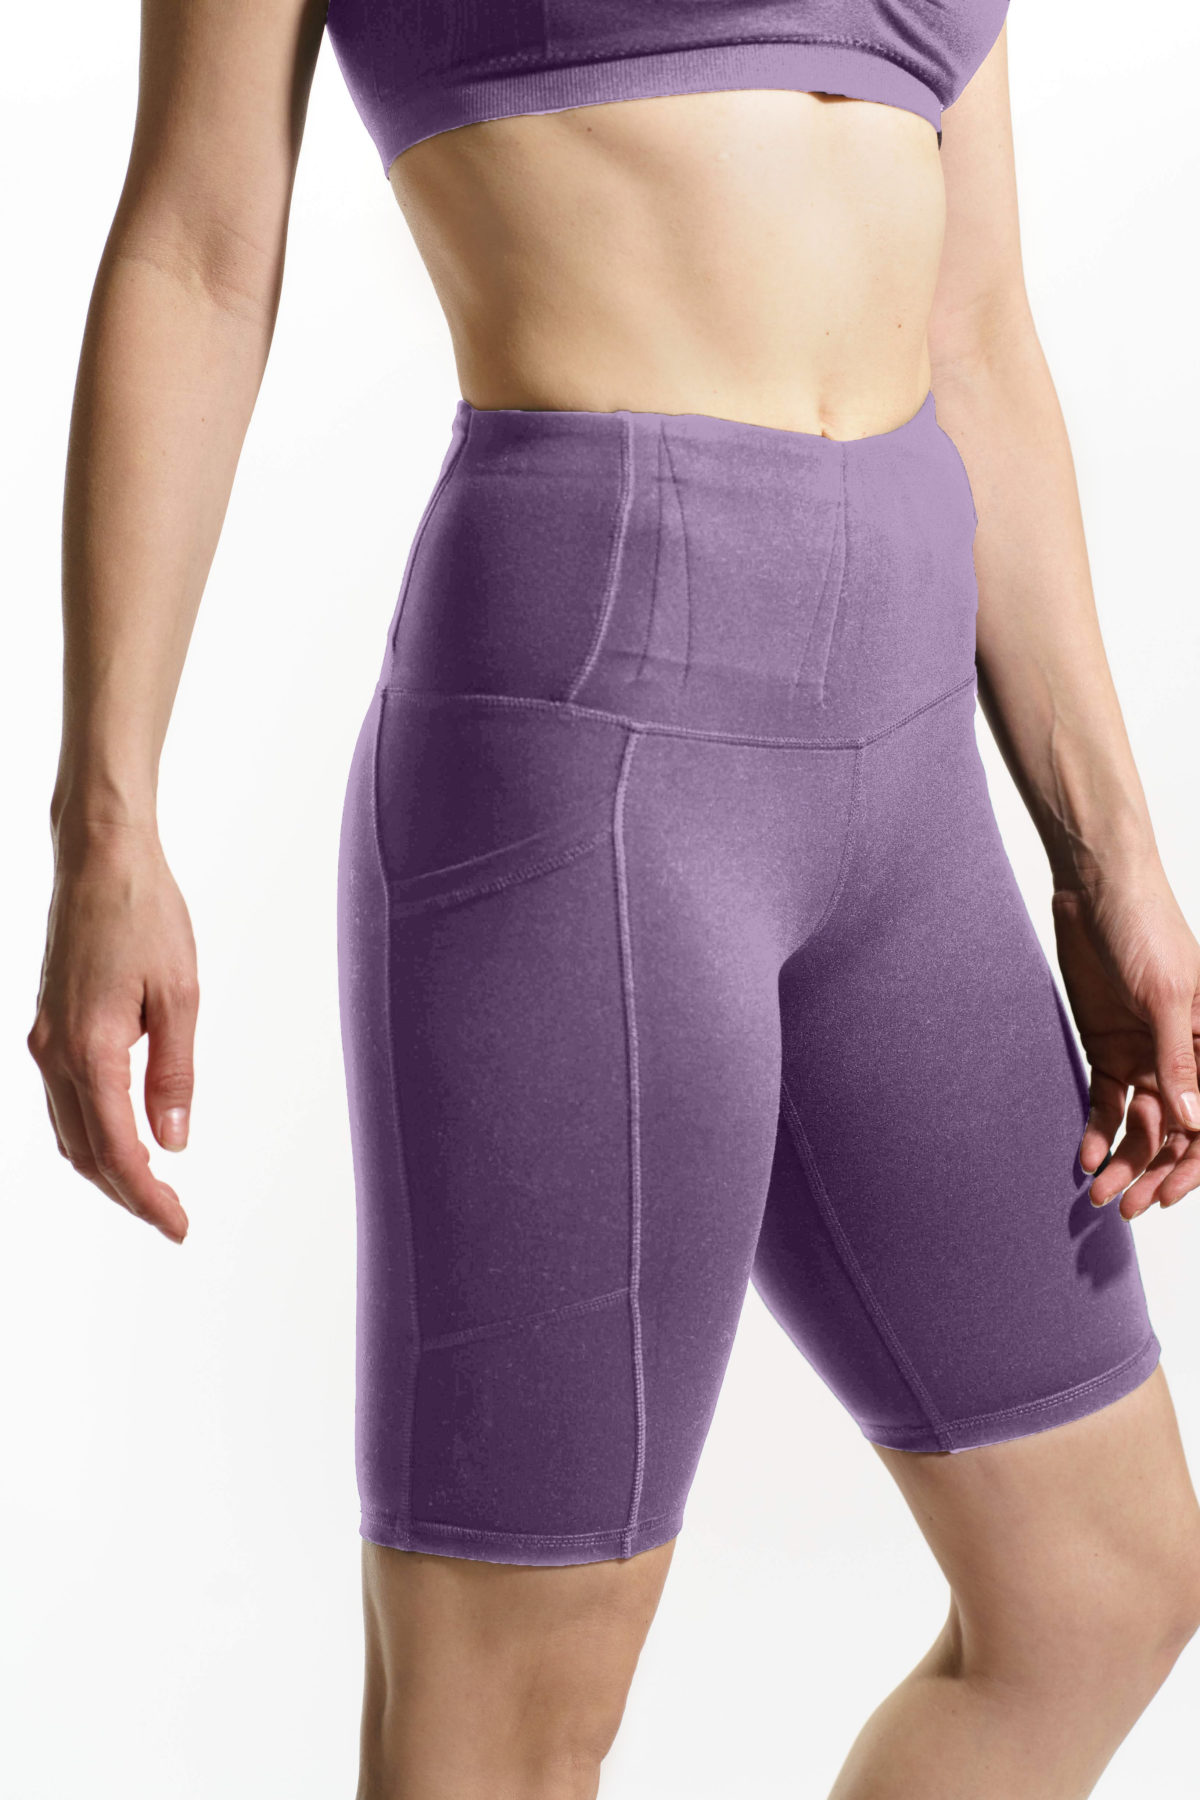 Alexo Athletica Carry Crop Leggings » Concealed Carry Inc